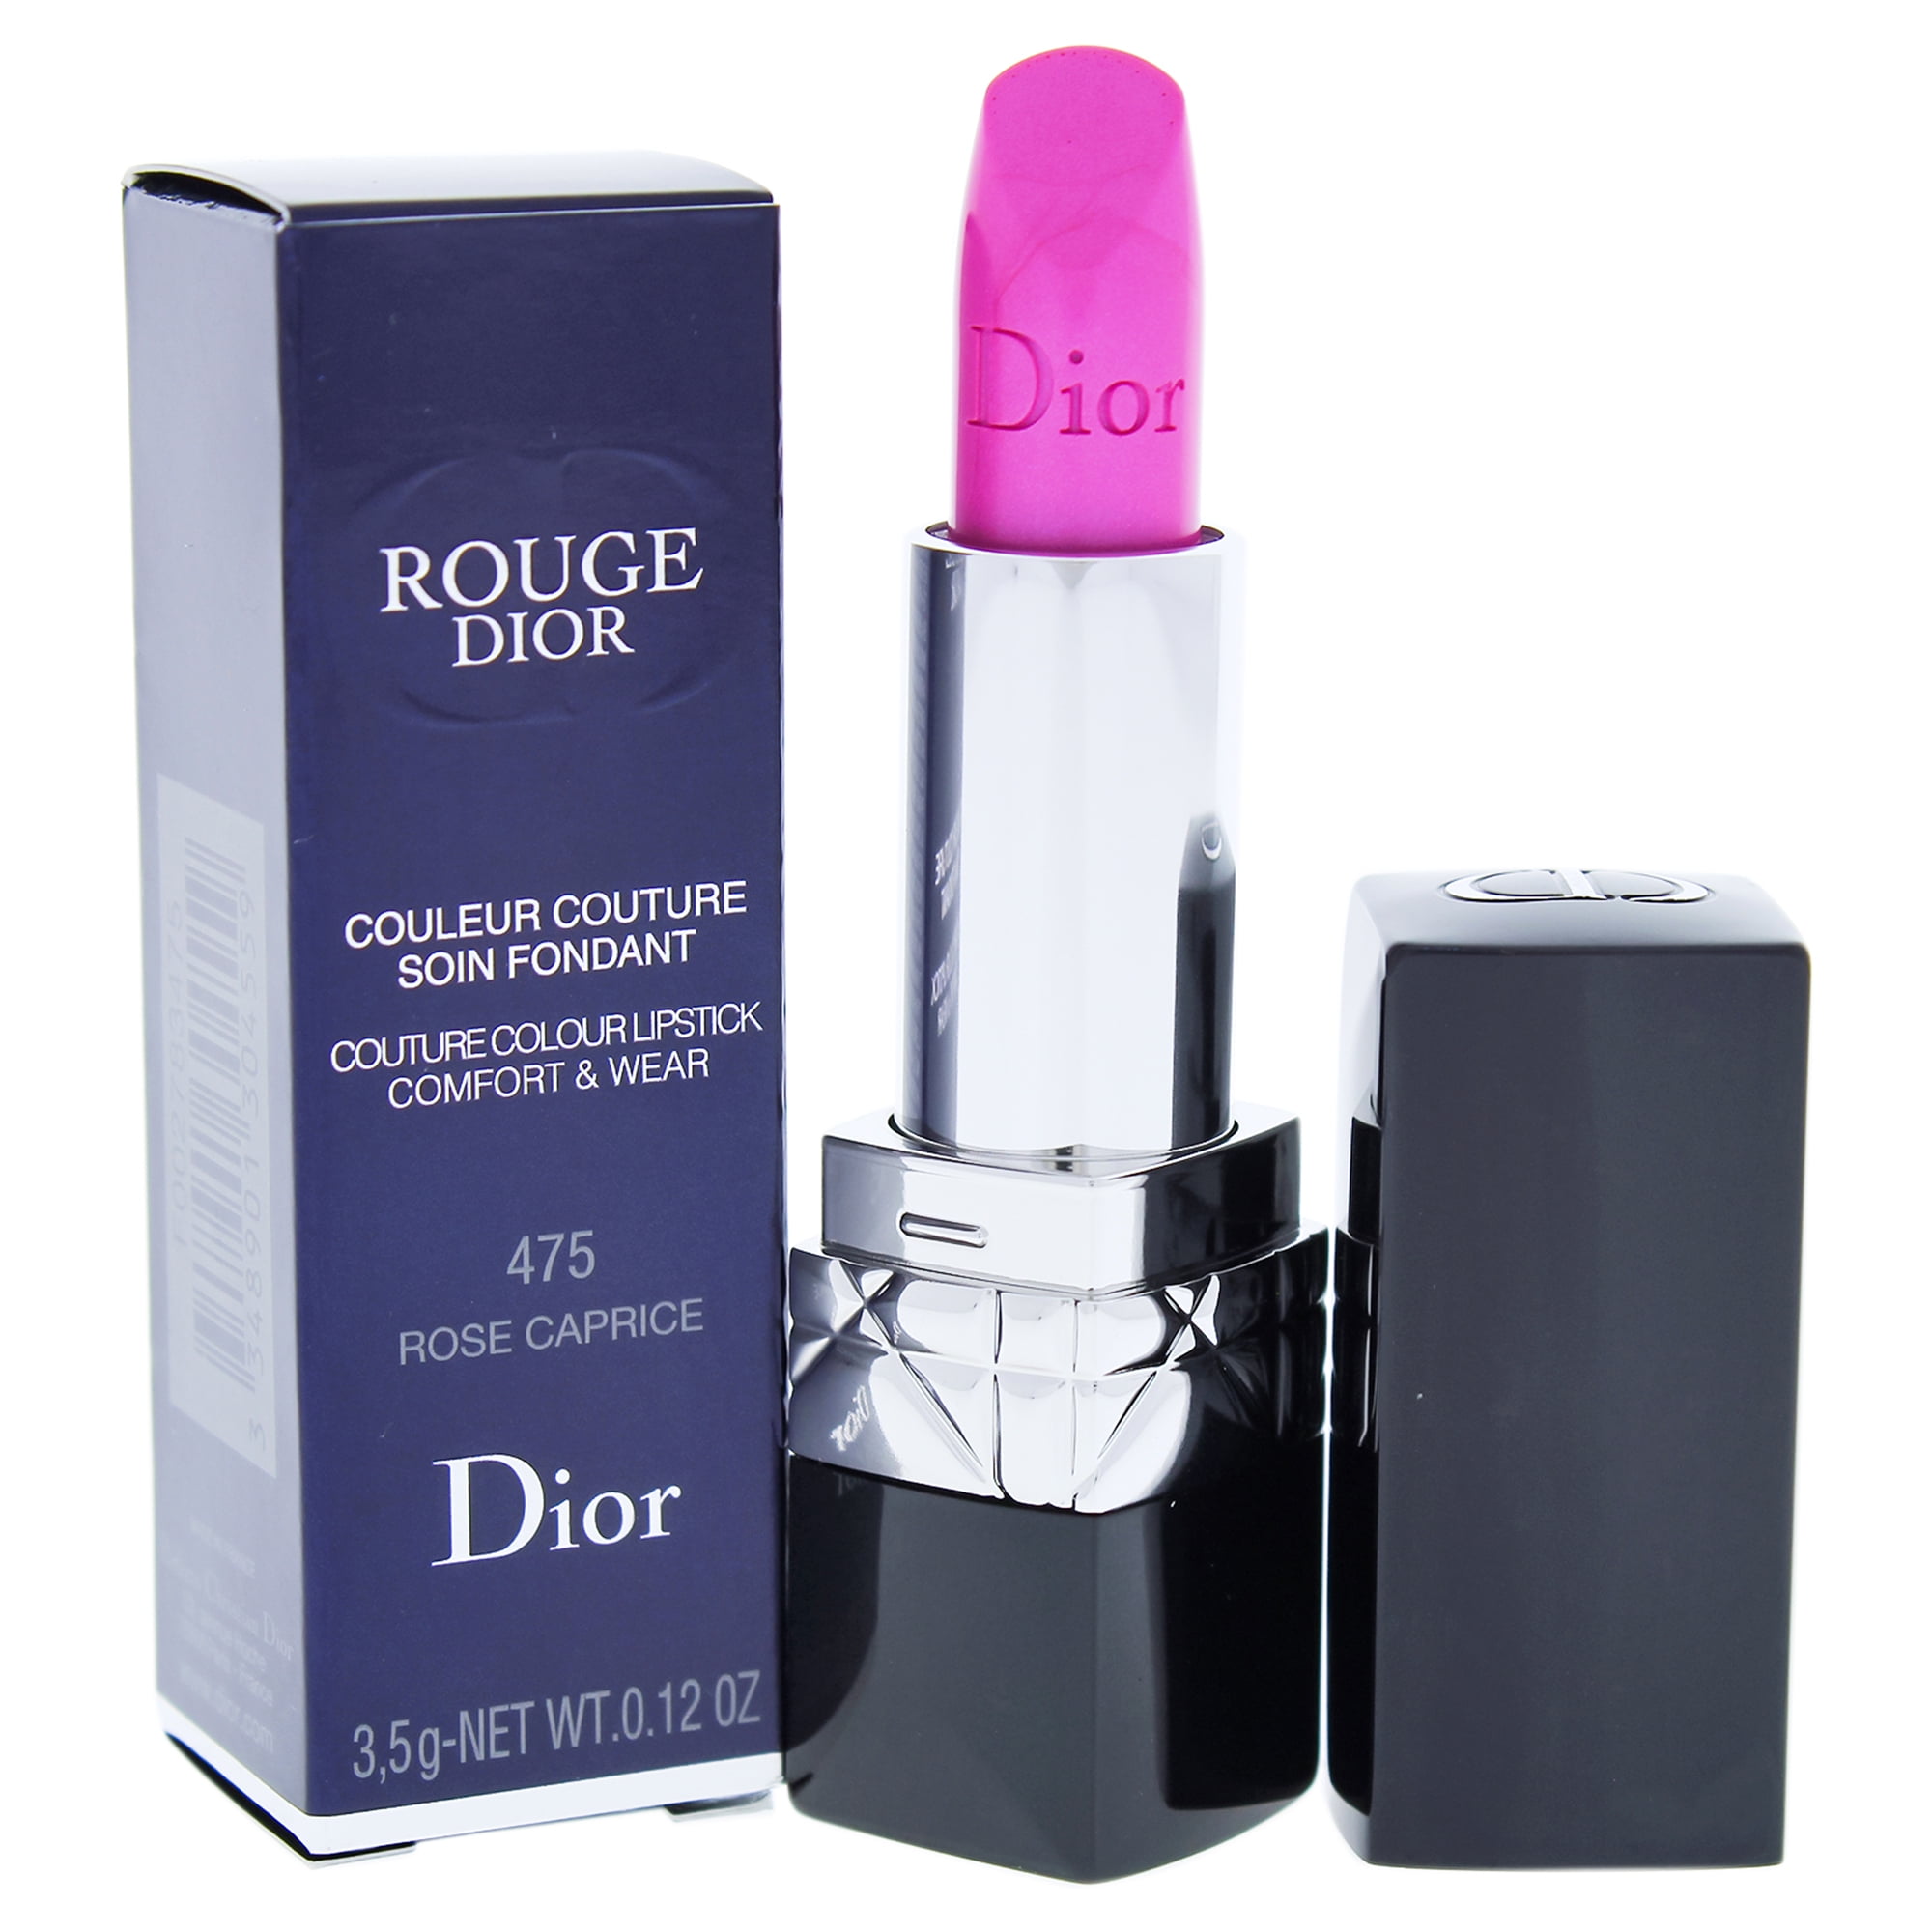 Rouge Dior Couture Colour Comfort and 